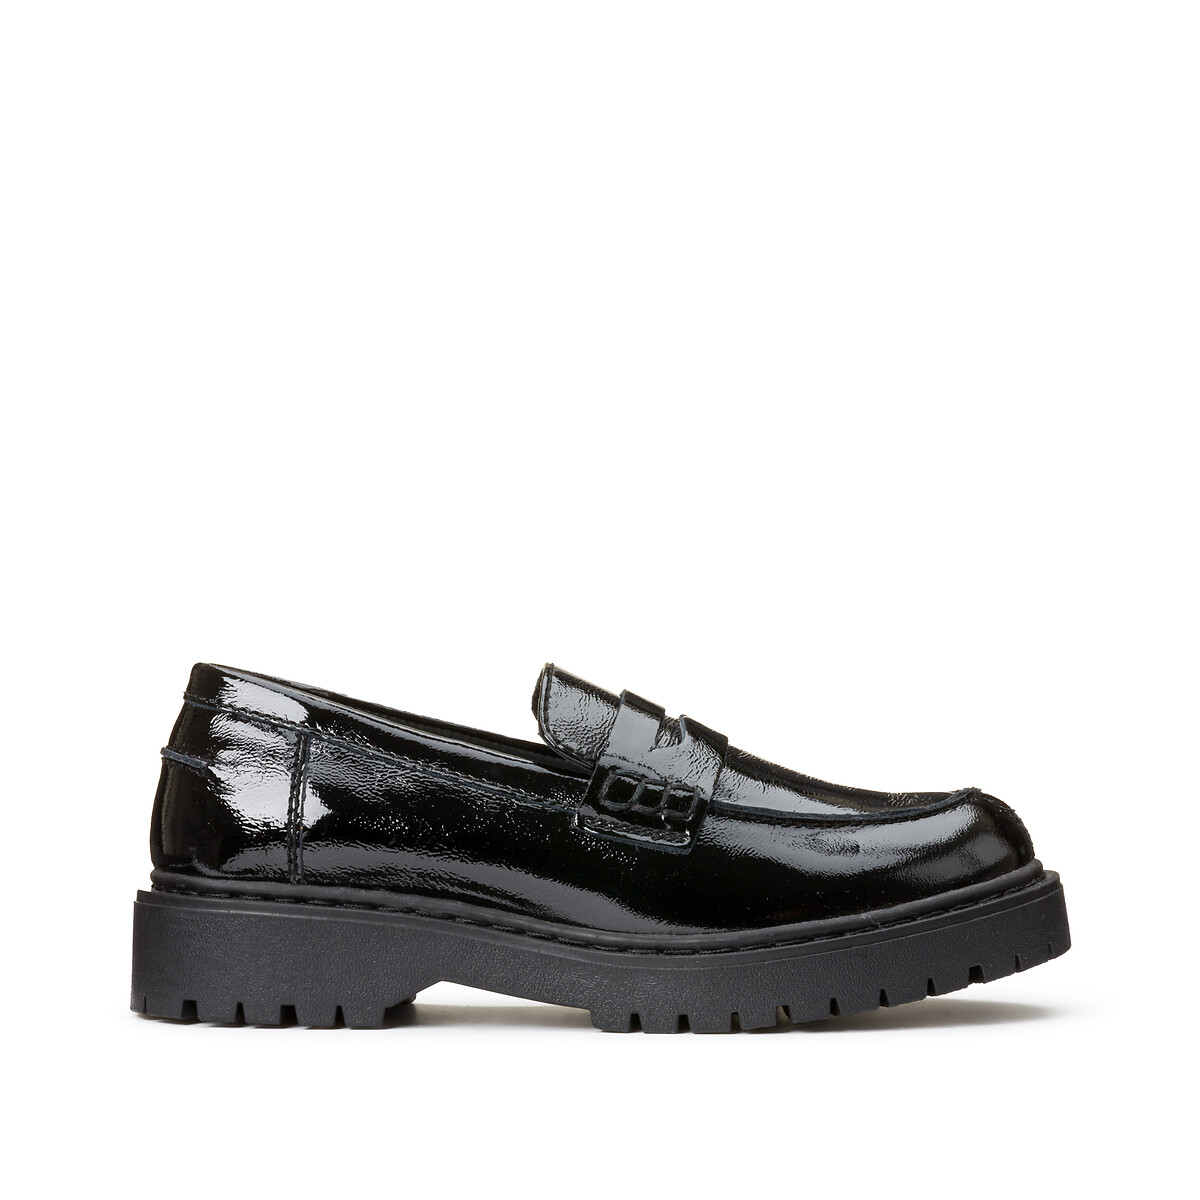 Bleyze breathable loafers in patent leather , black, Geox | La Redoute